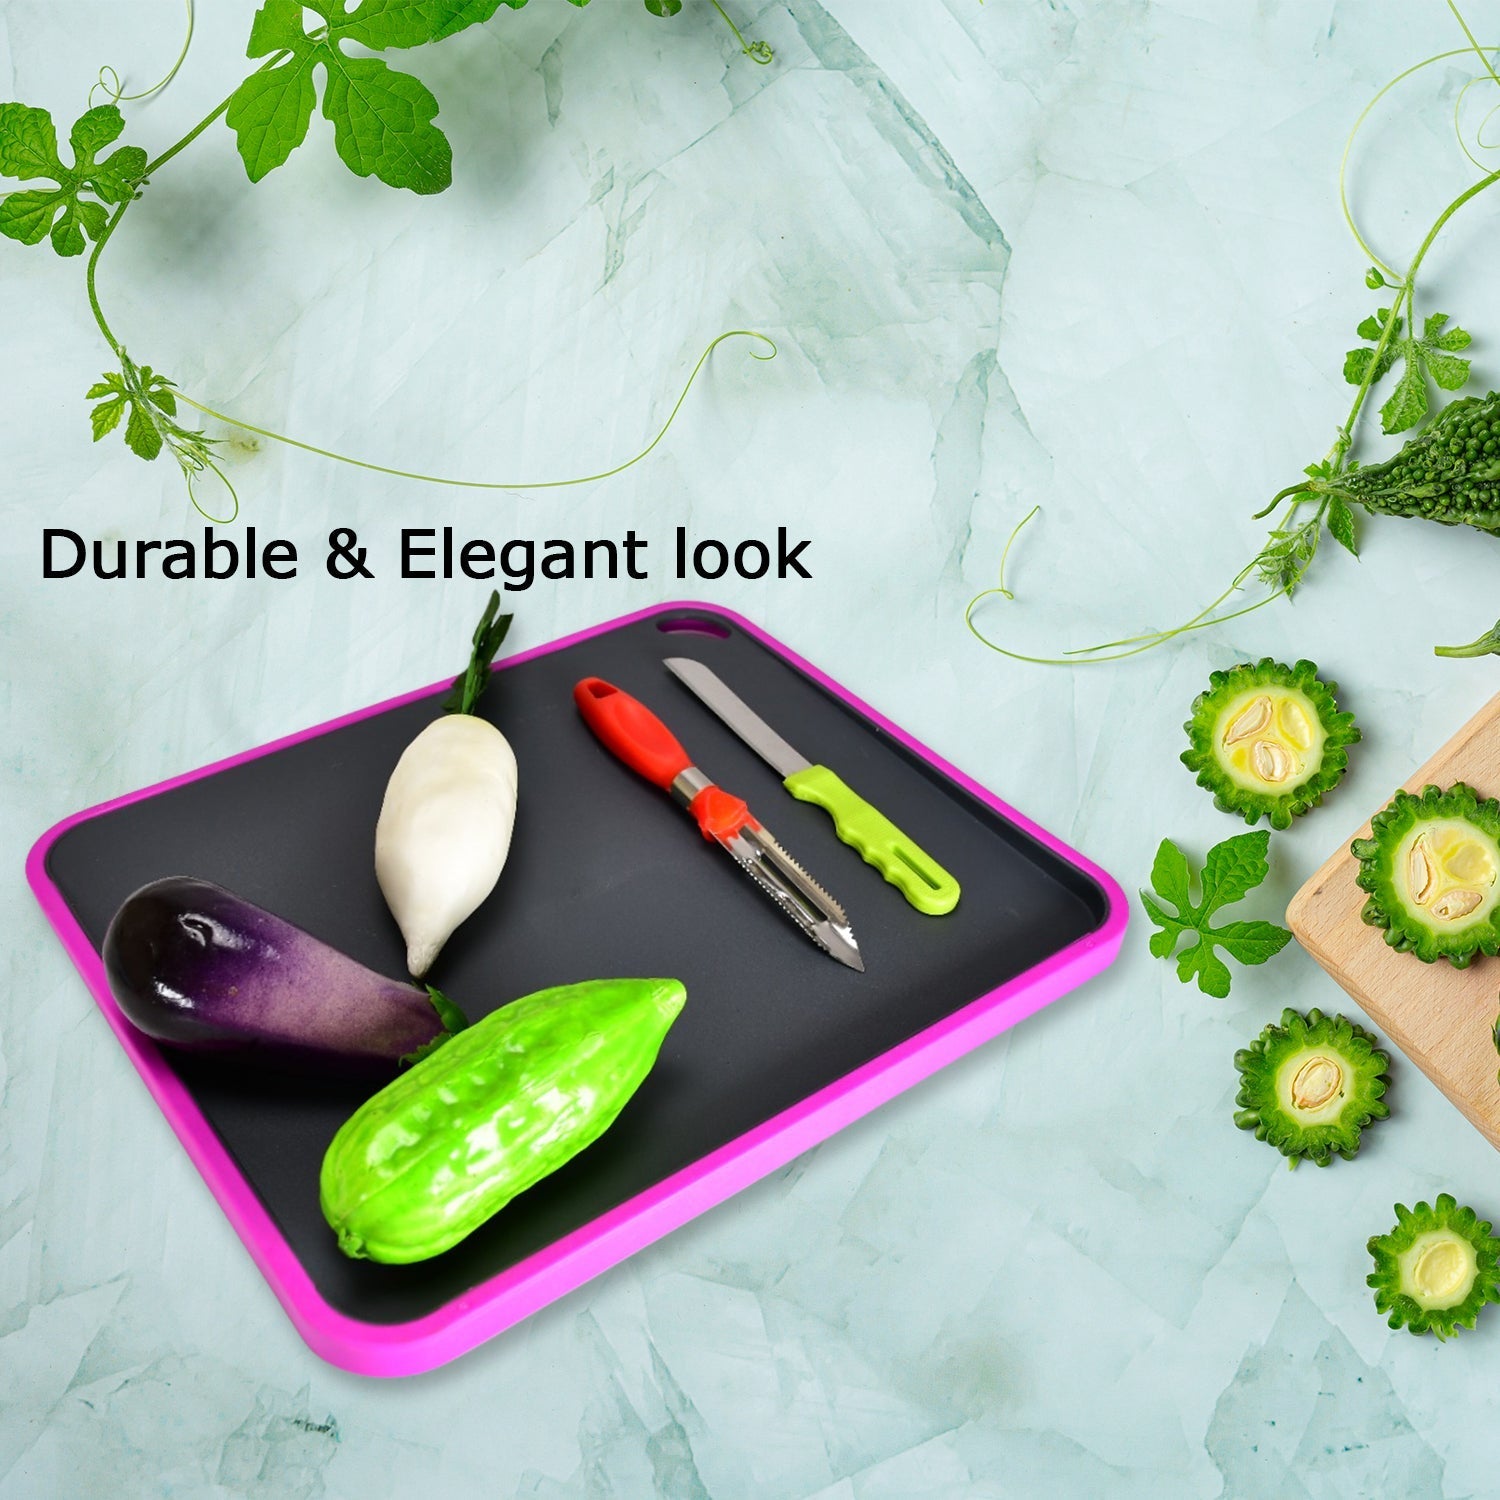 2462 Vegetables and Fruits Cutting Chopping Board Plastic Chopper Cutter Board Non-slip Antibacterial Surface with Extra Thickness DeoDap